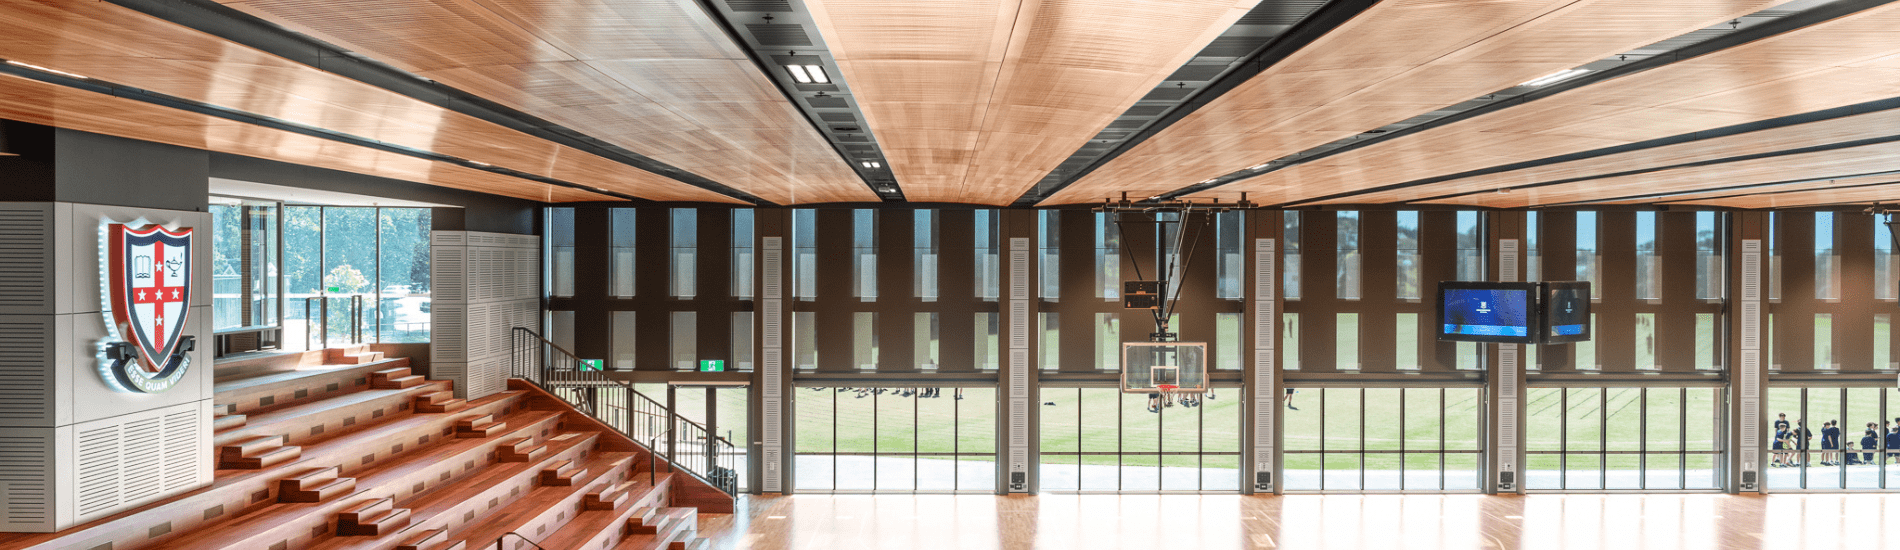 Numerous SUPAWOOD products used to complete premium school environment